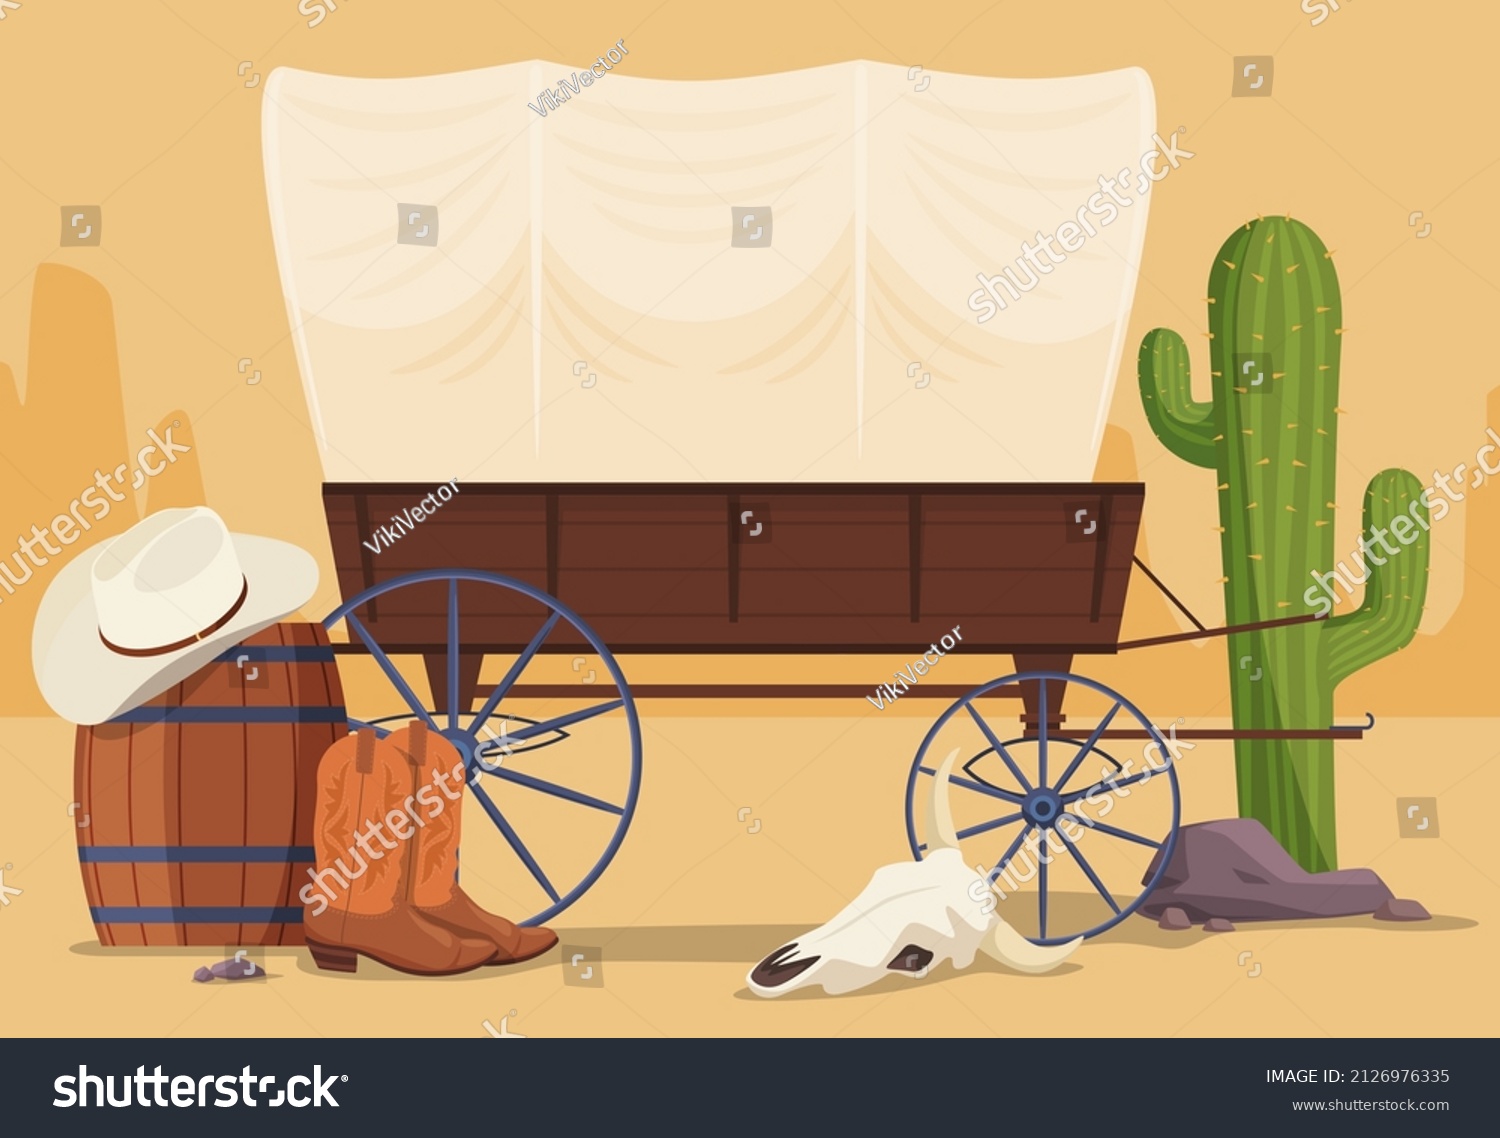 SVG of Wild West covered wooden wagon vector flat illustration. Traditional Western transportation with cowboy hat, boots, cactus, barrel and cow skull at desert. Retro passenger or freight moving carriage svg